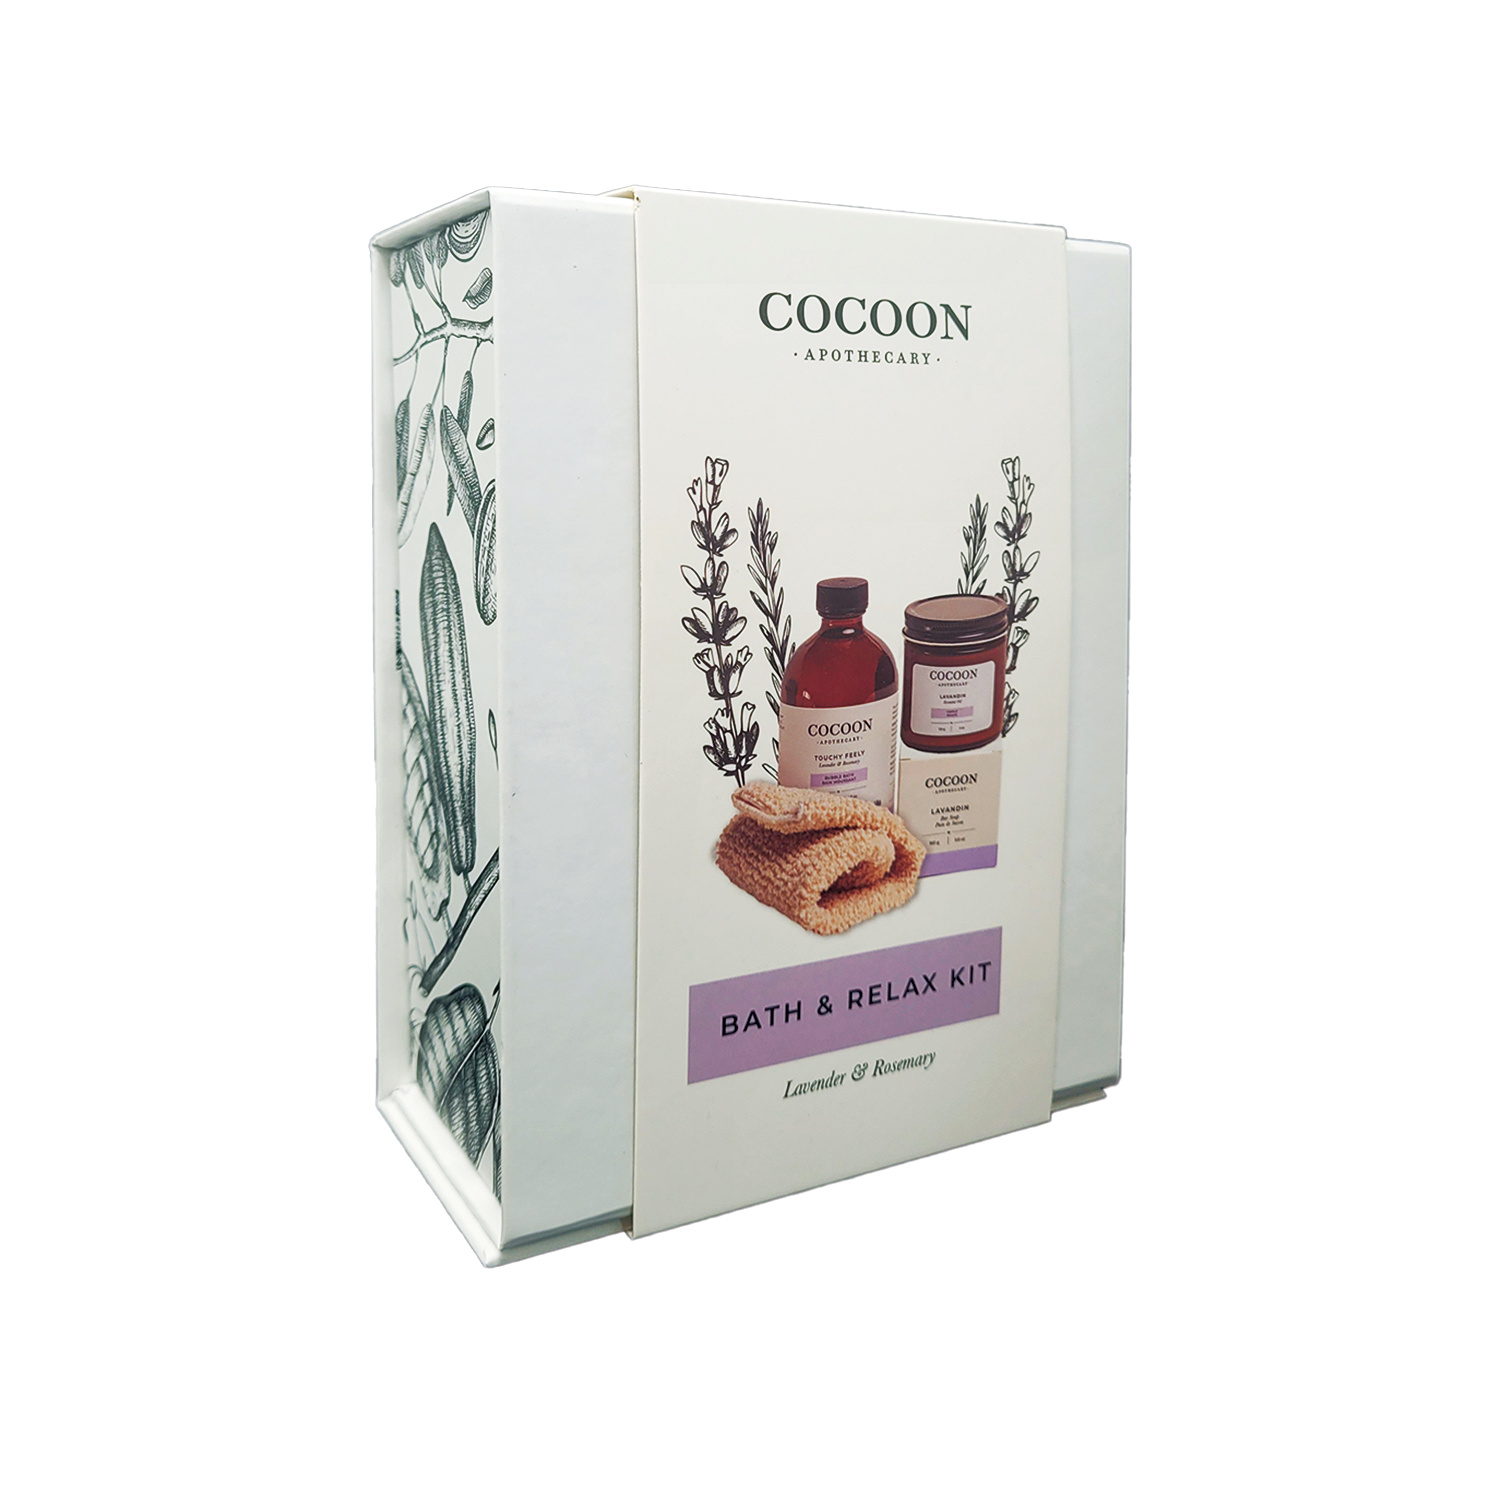 Bath and Relax Kit - Cocoon Apothecary